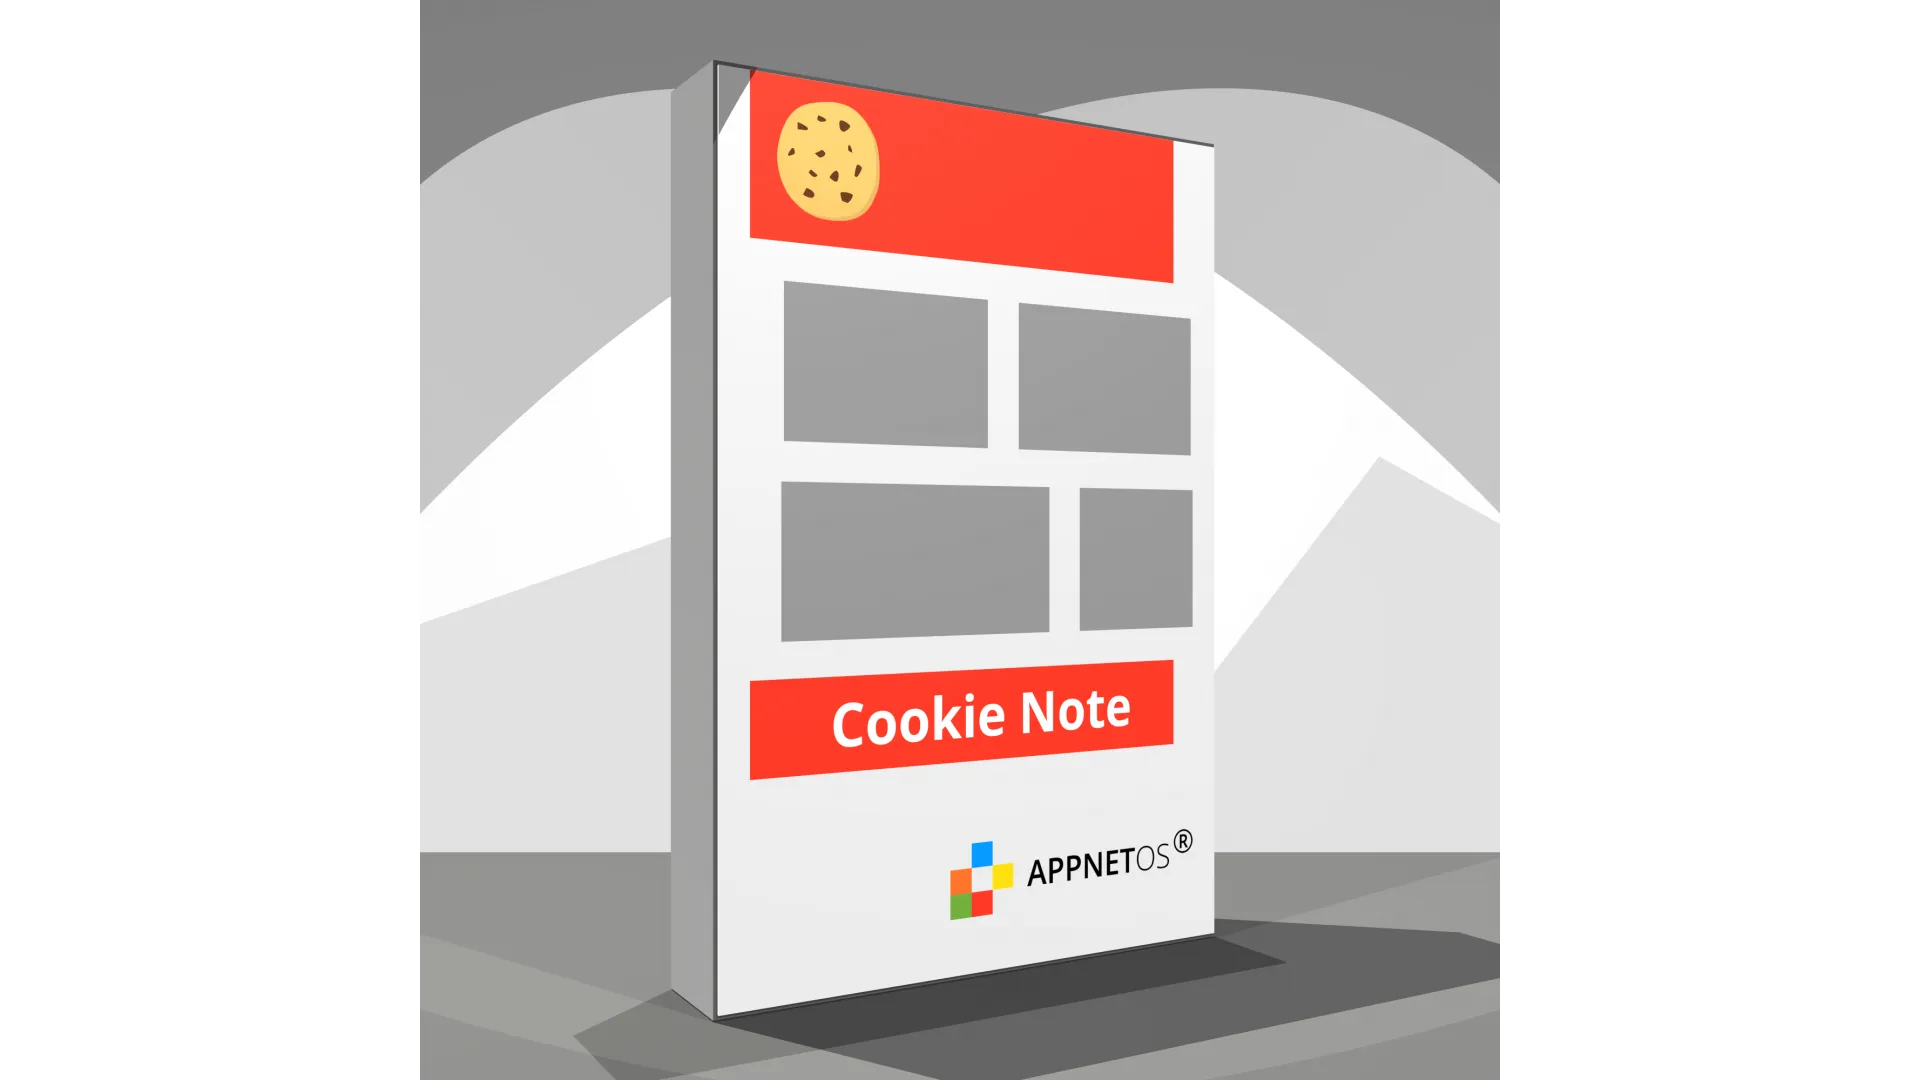 APPNET OS Cookie Note